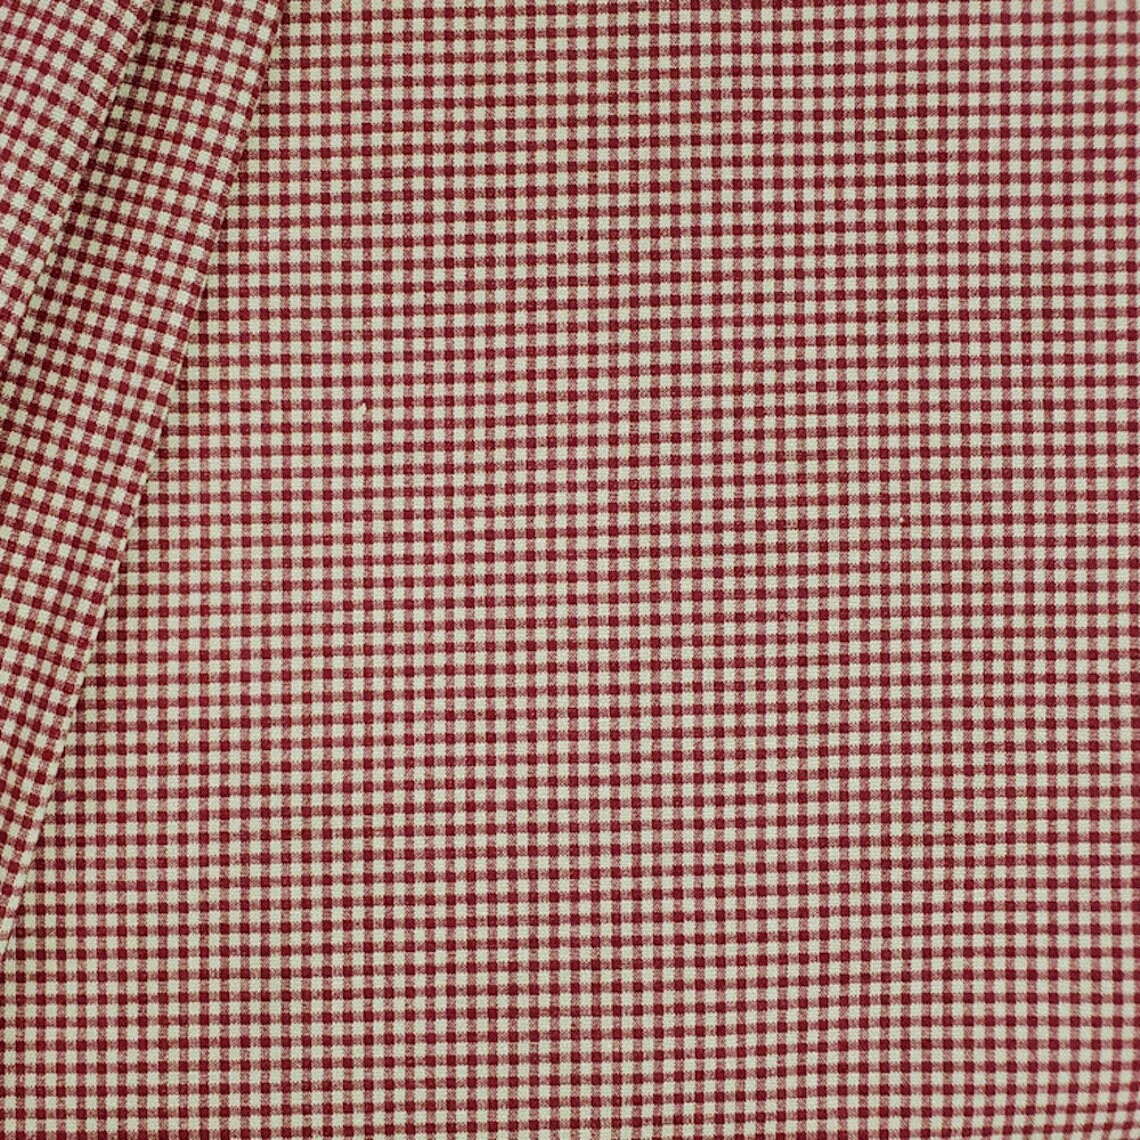 decorative pillows in farmhouse red gingham check on beige